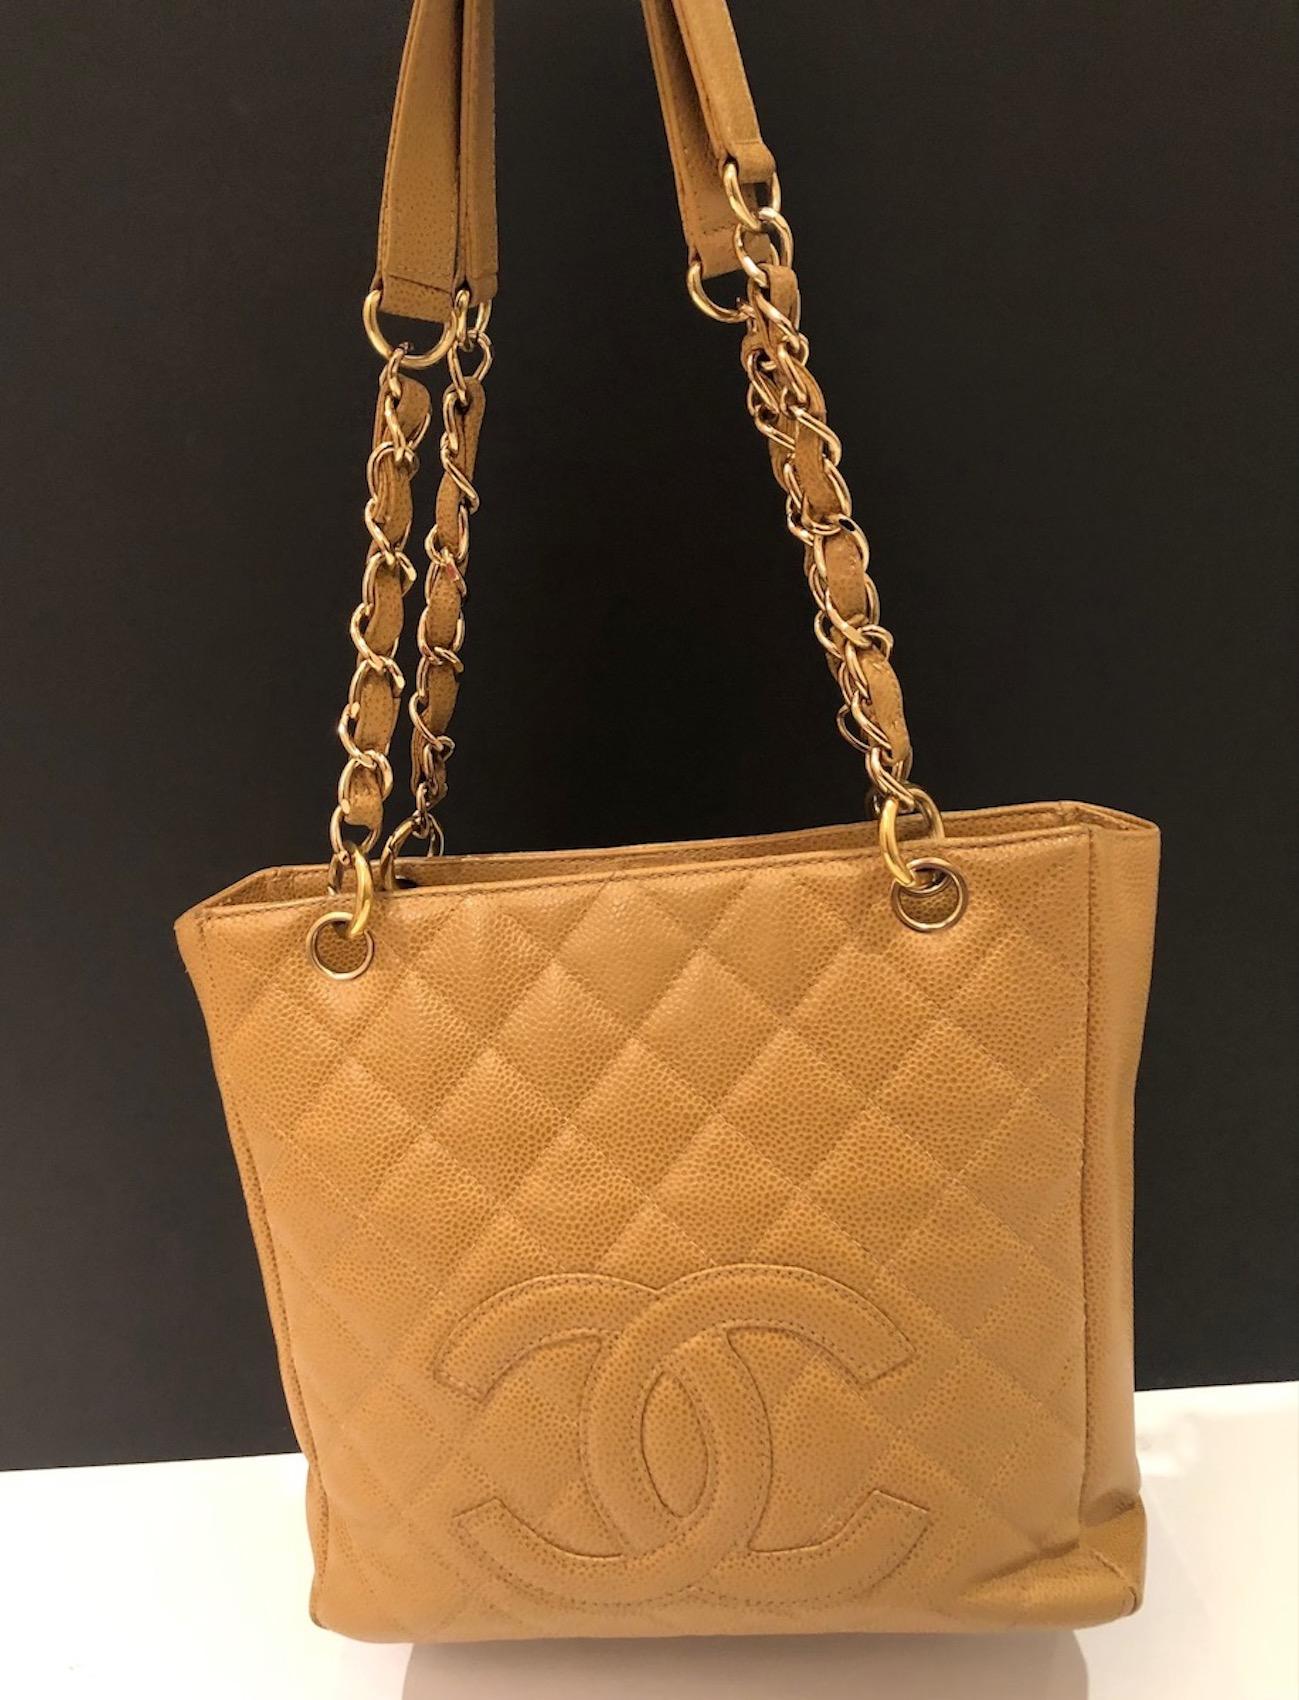 CHANEL Small Petit Shopping Tote Bag Gold Tone Caviar Leather in Camel Beige Circa 2003
A small, very cute rare ‘petit’ 24 cm Chanel tote bag Circa 2003-2004. This PST bag is handcrafted from camel-beige caviar grained leather and finished with